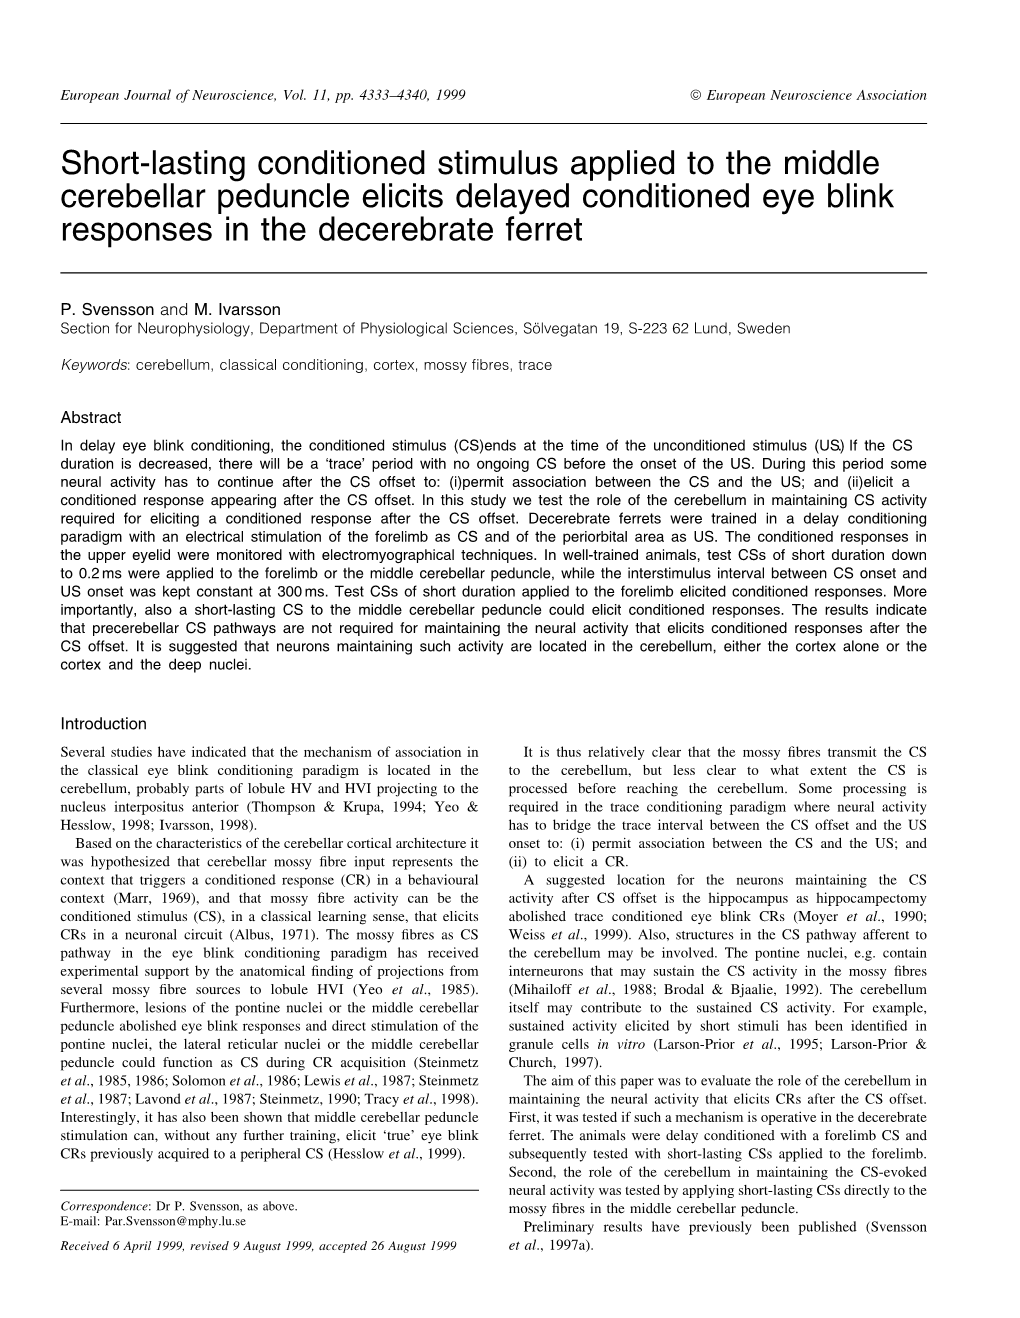 Short-Lasting Conditioned Stimulus Applied to the Middle Cerebellar Peduncle Elicits Delayed Conditioned Eye Blink Responses in the Decerebrate Ferret